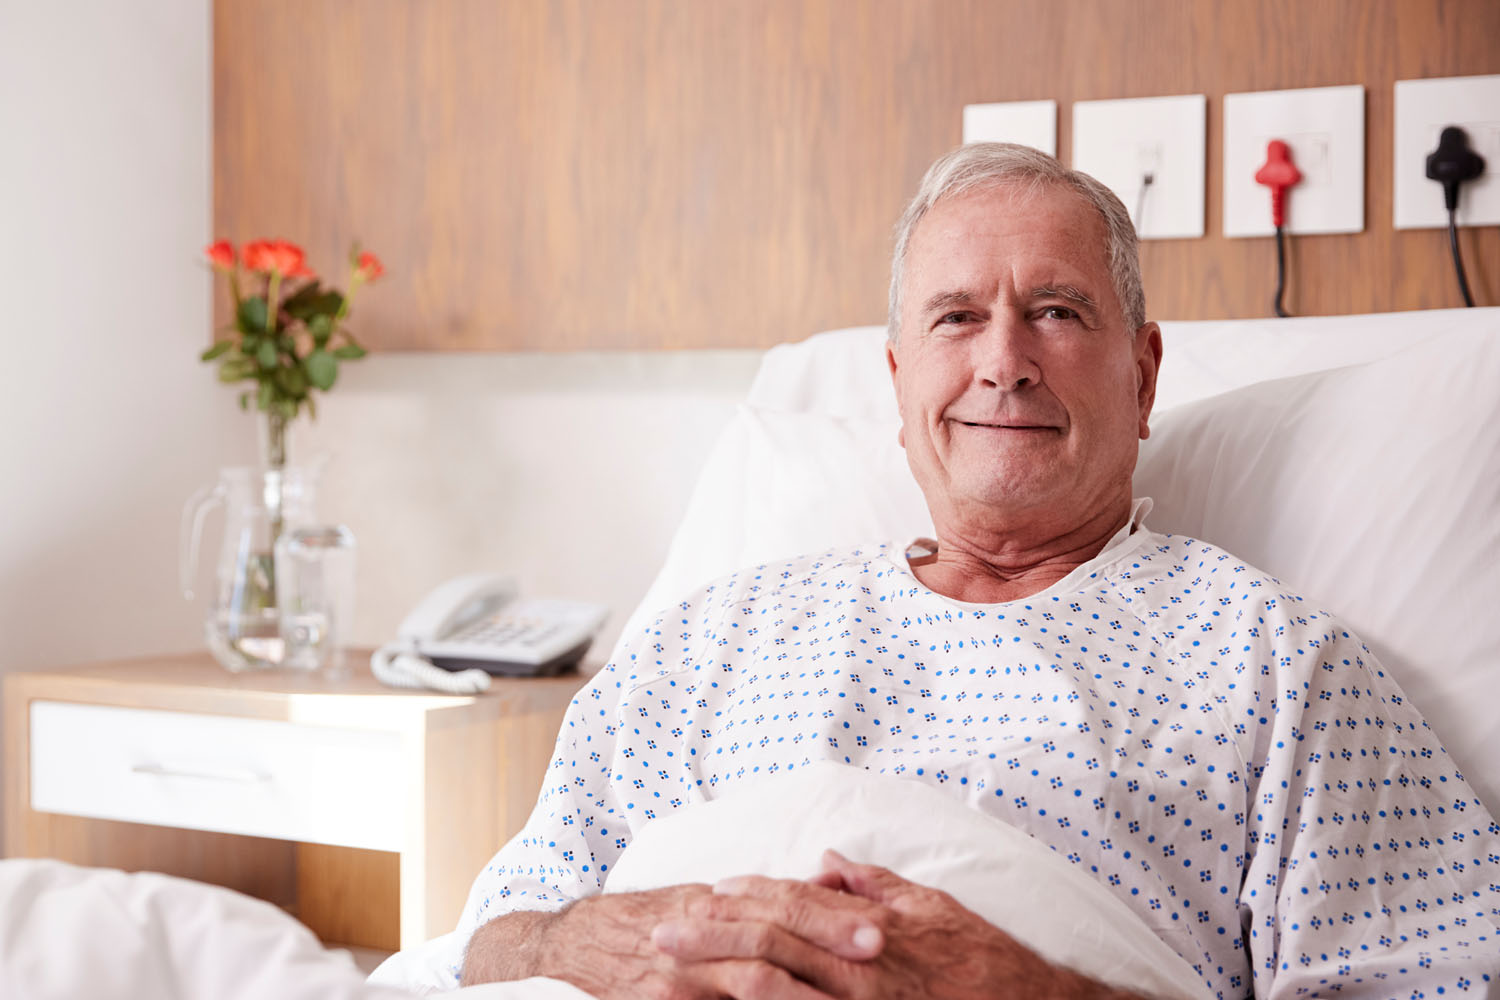 Hospital Services photo with man in hospital bed